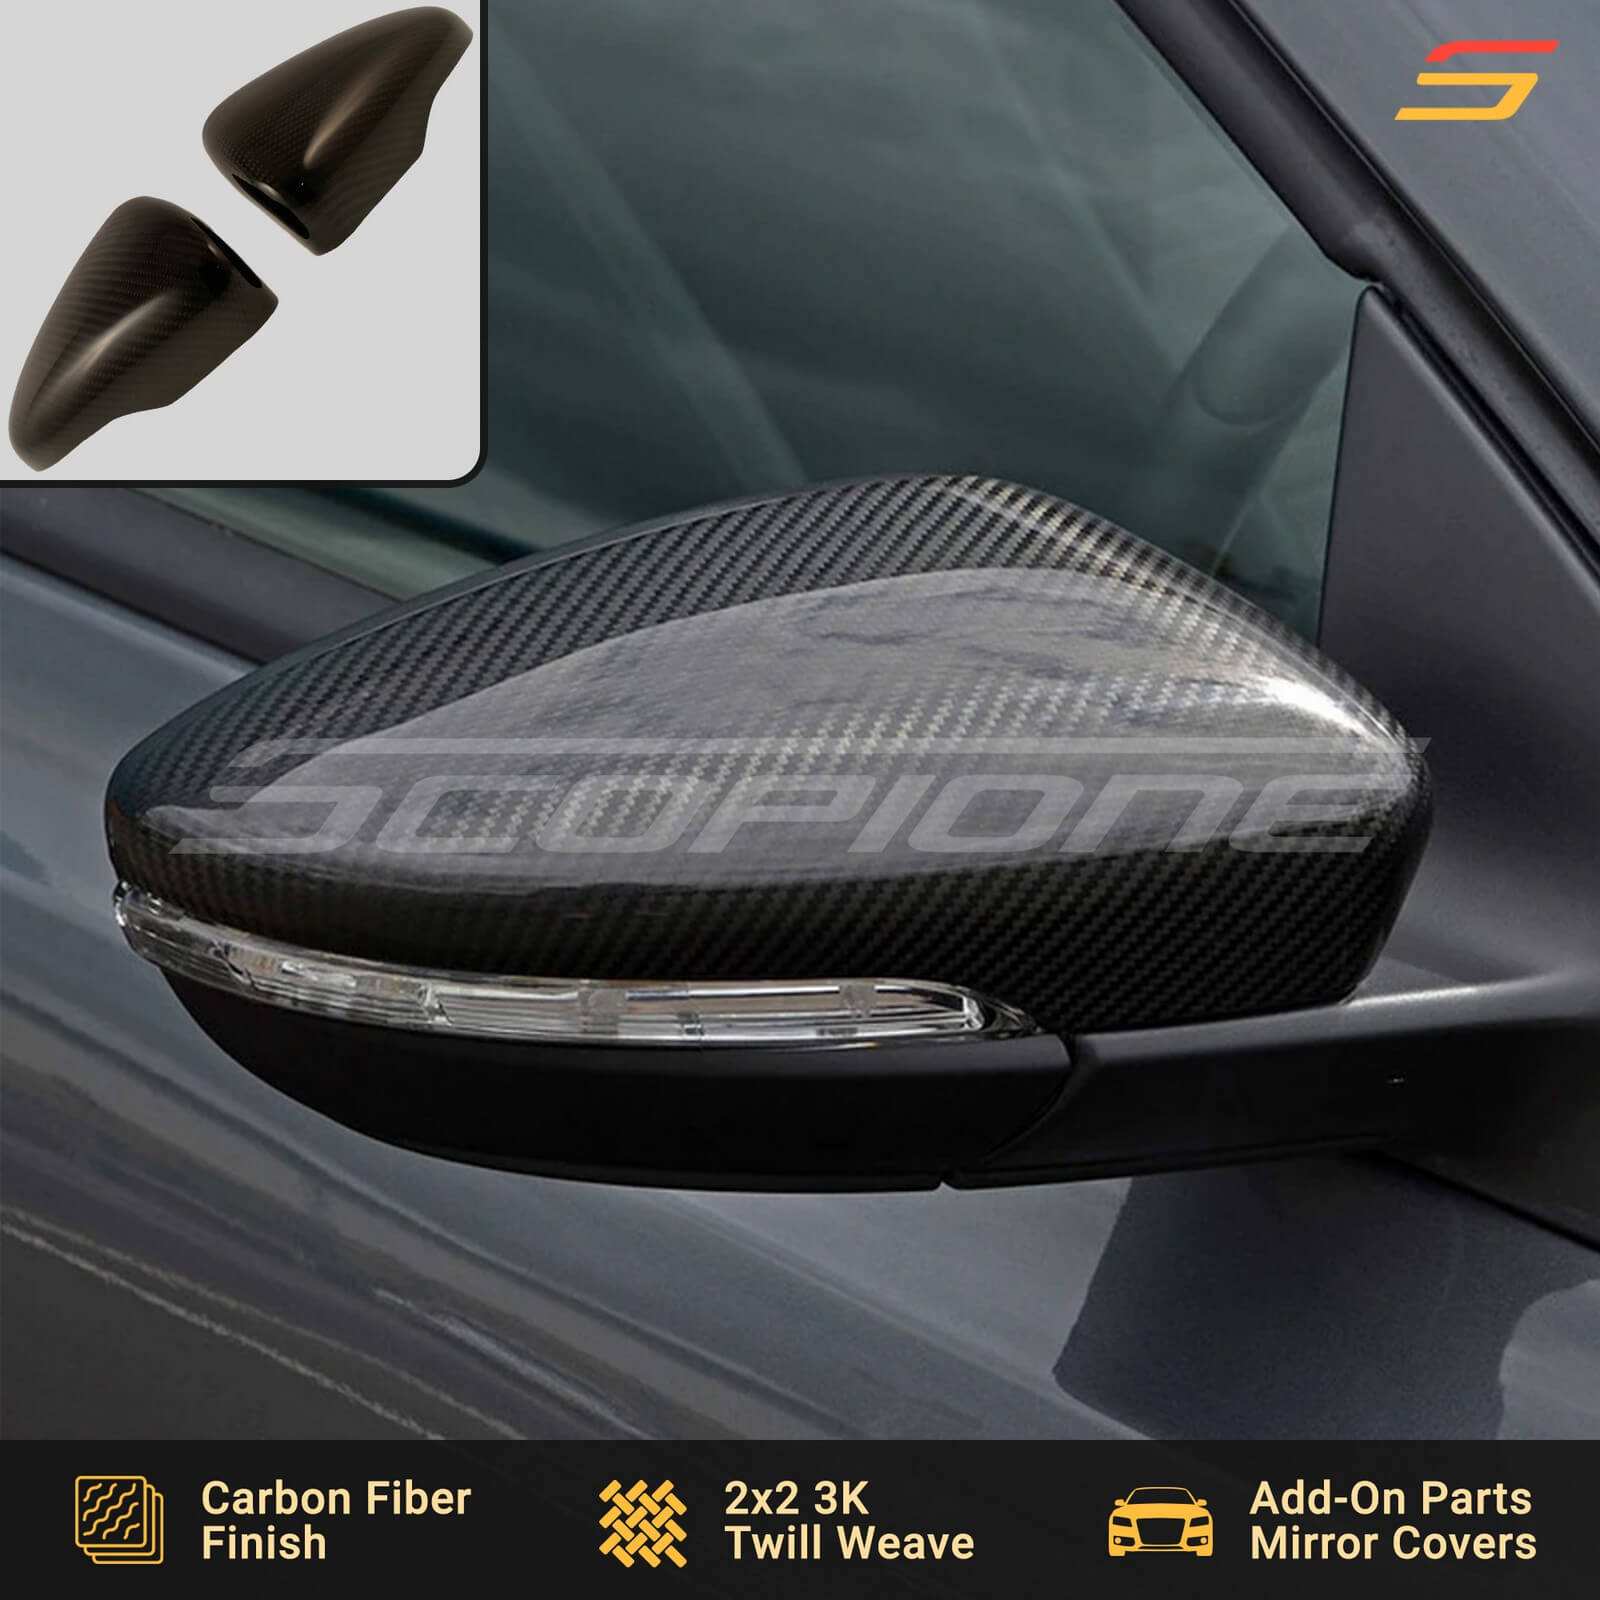 Cuztom Tuning 1:1 Direct Replacement Real Carbon Fiber Side Mirror Cover  Fits for 2010-2014 Golf 6 Mk6 GTI R VI